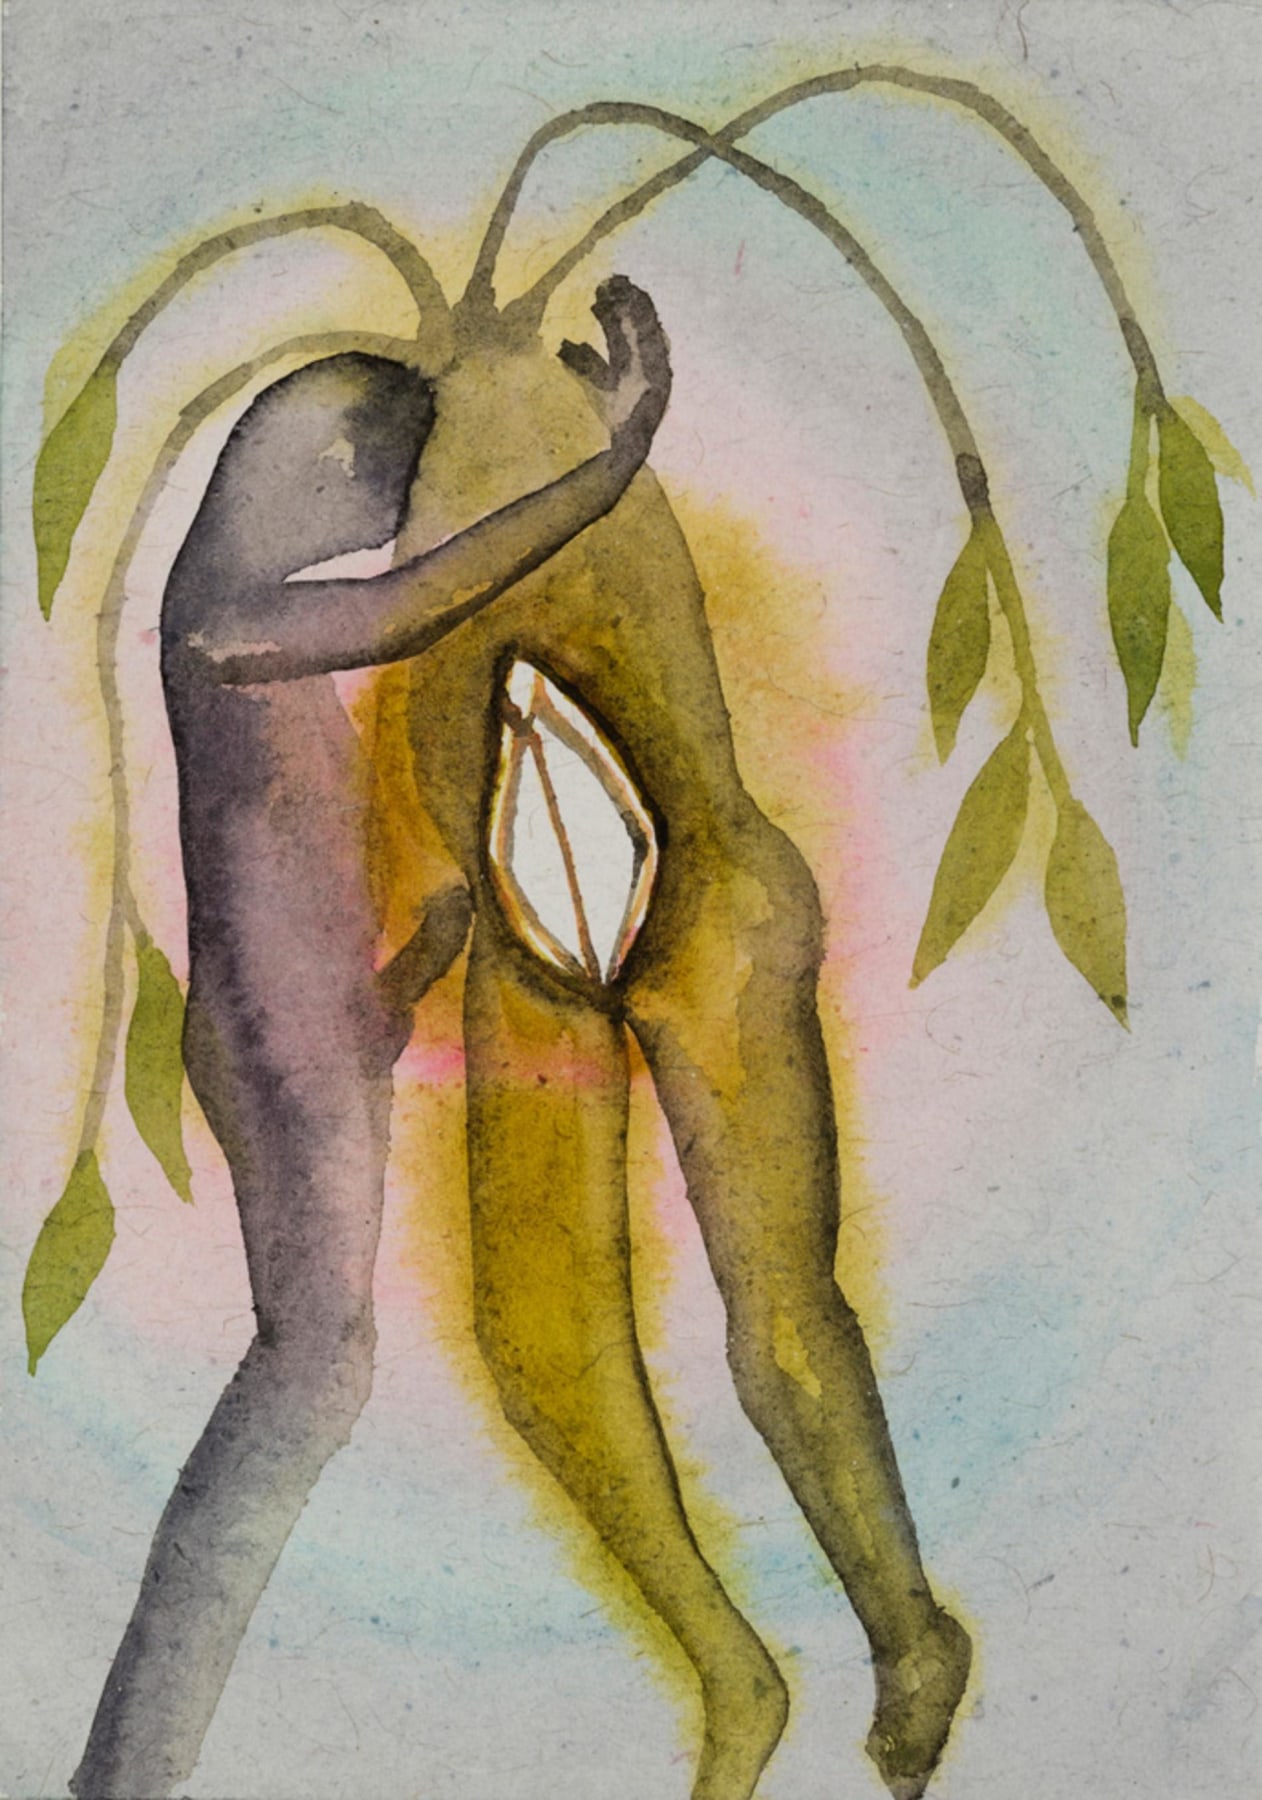 Image of  FRANCESCO CLEMENTE's A Story Well Told (03), 2013